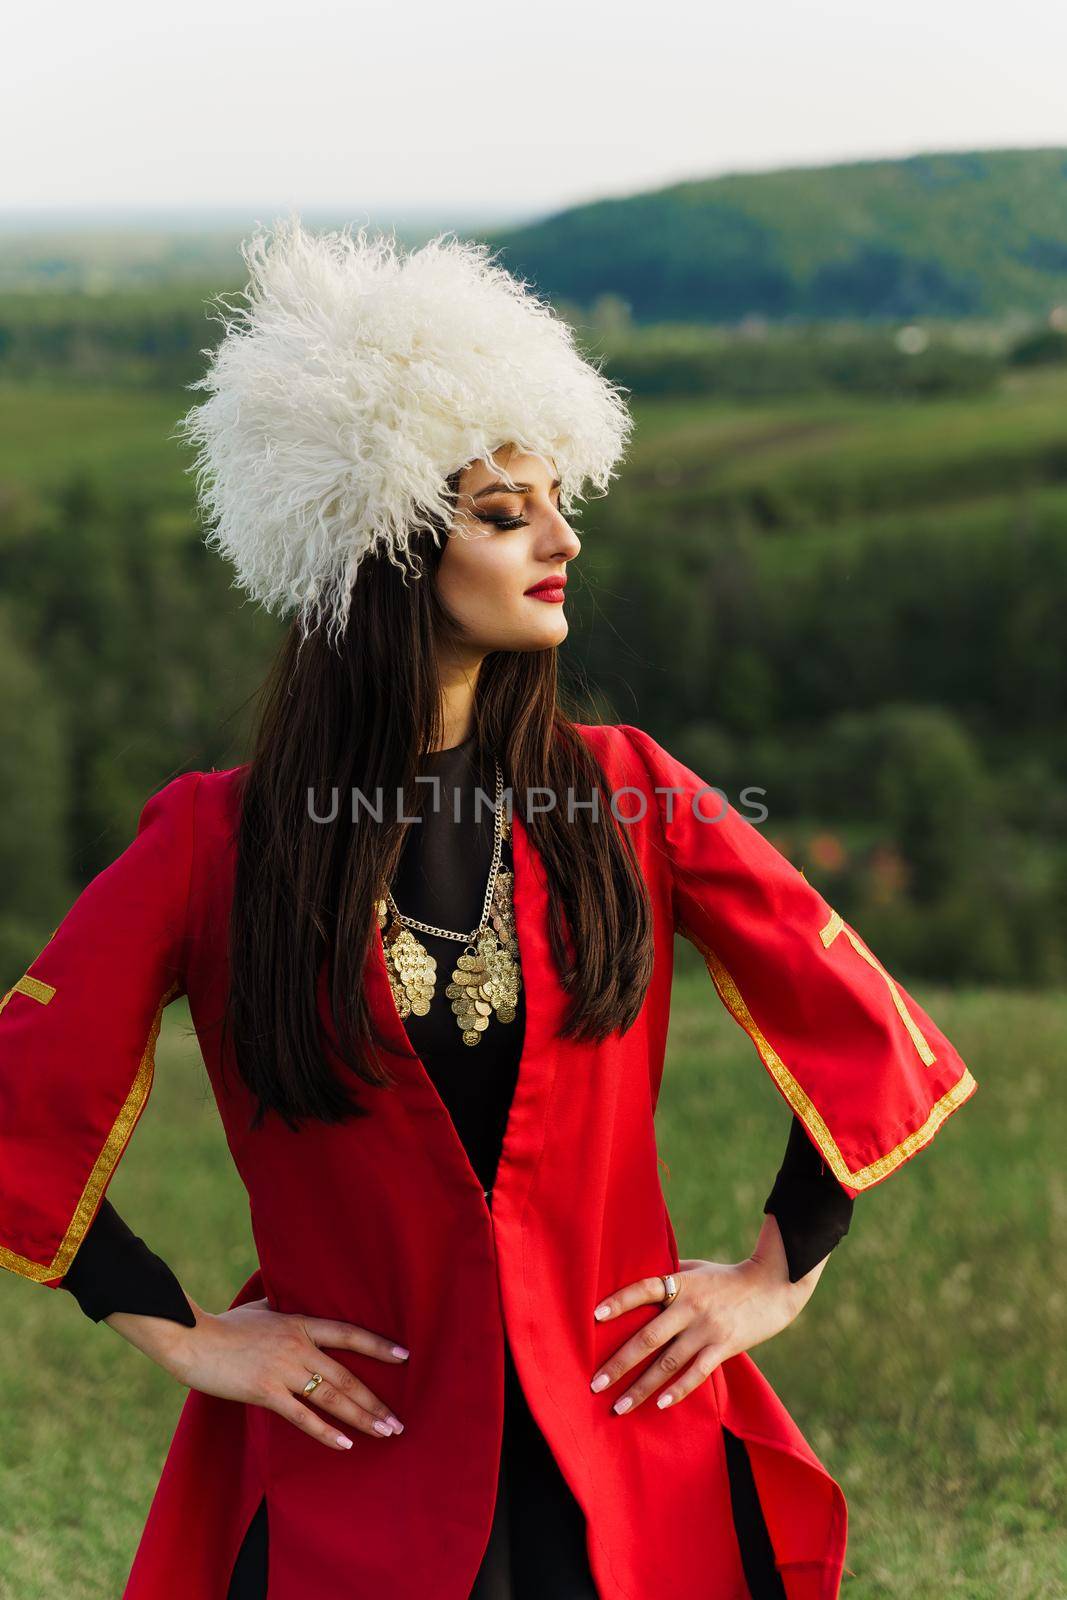 Georgian girl in papakha and red national dress with cross symbols. Attractive woman on the lake. Georgian culture lifestyle. Woman looks right side